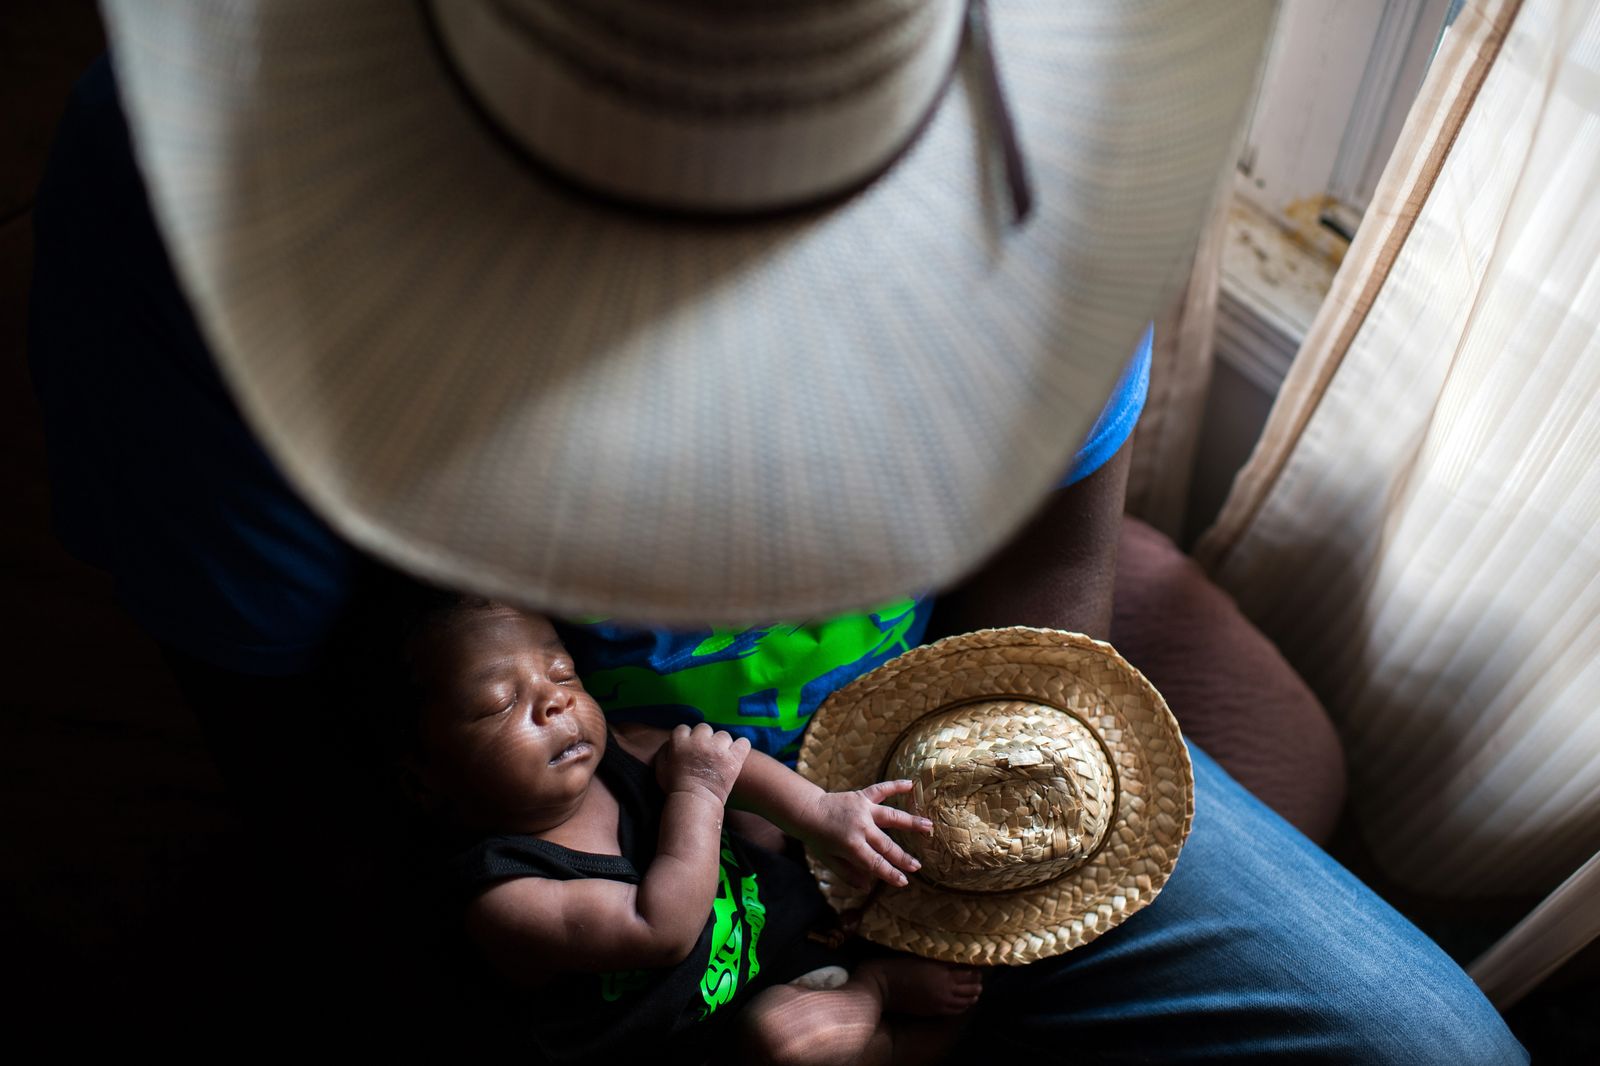 © Rory Doyle - Newborn Jestin Brown is held by his father, Jessie Brown, at their home in Cleveland, Mississippi on July 2, 2018.